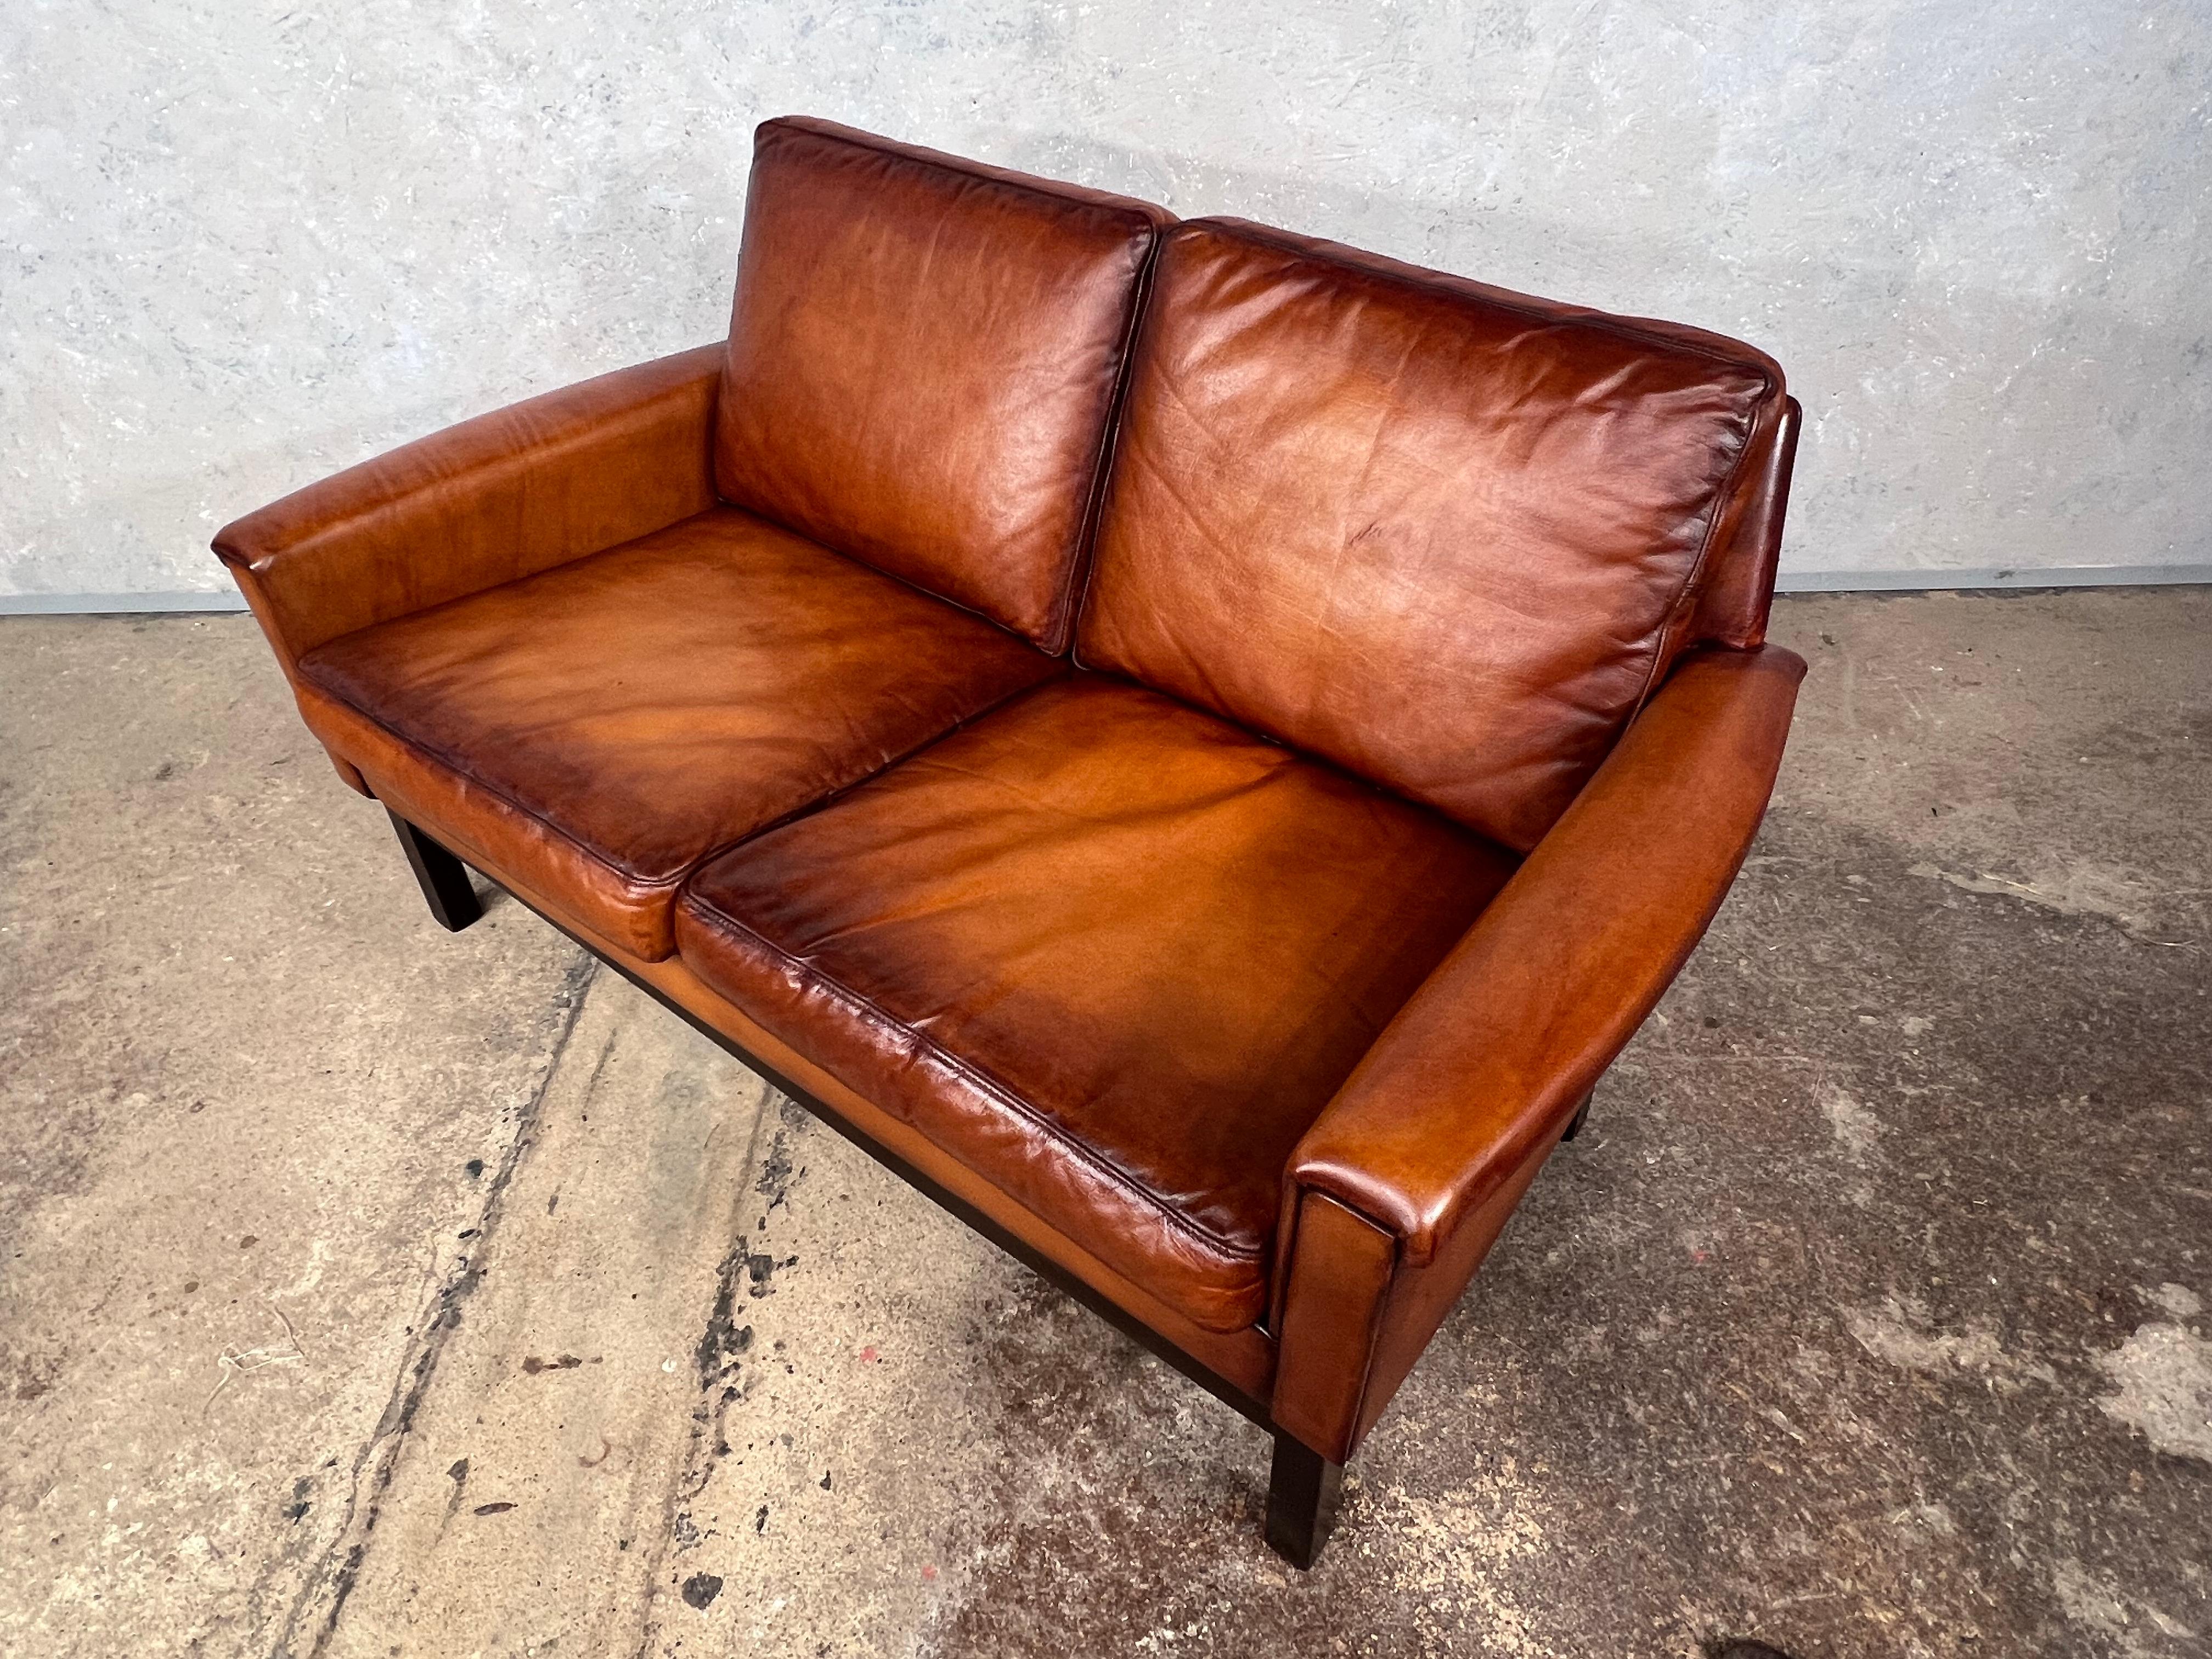 Vintage Danish 70s Mid-Century Light Tan Two Seater Leather Sofa #547 For Sale 2